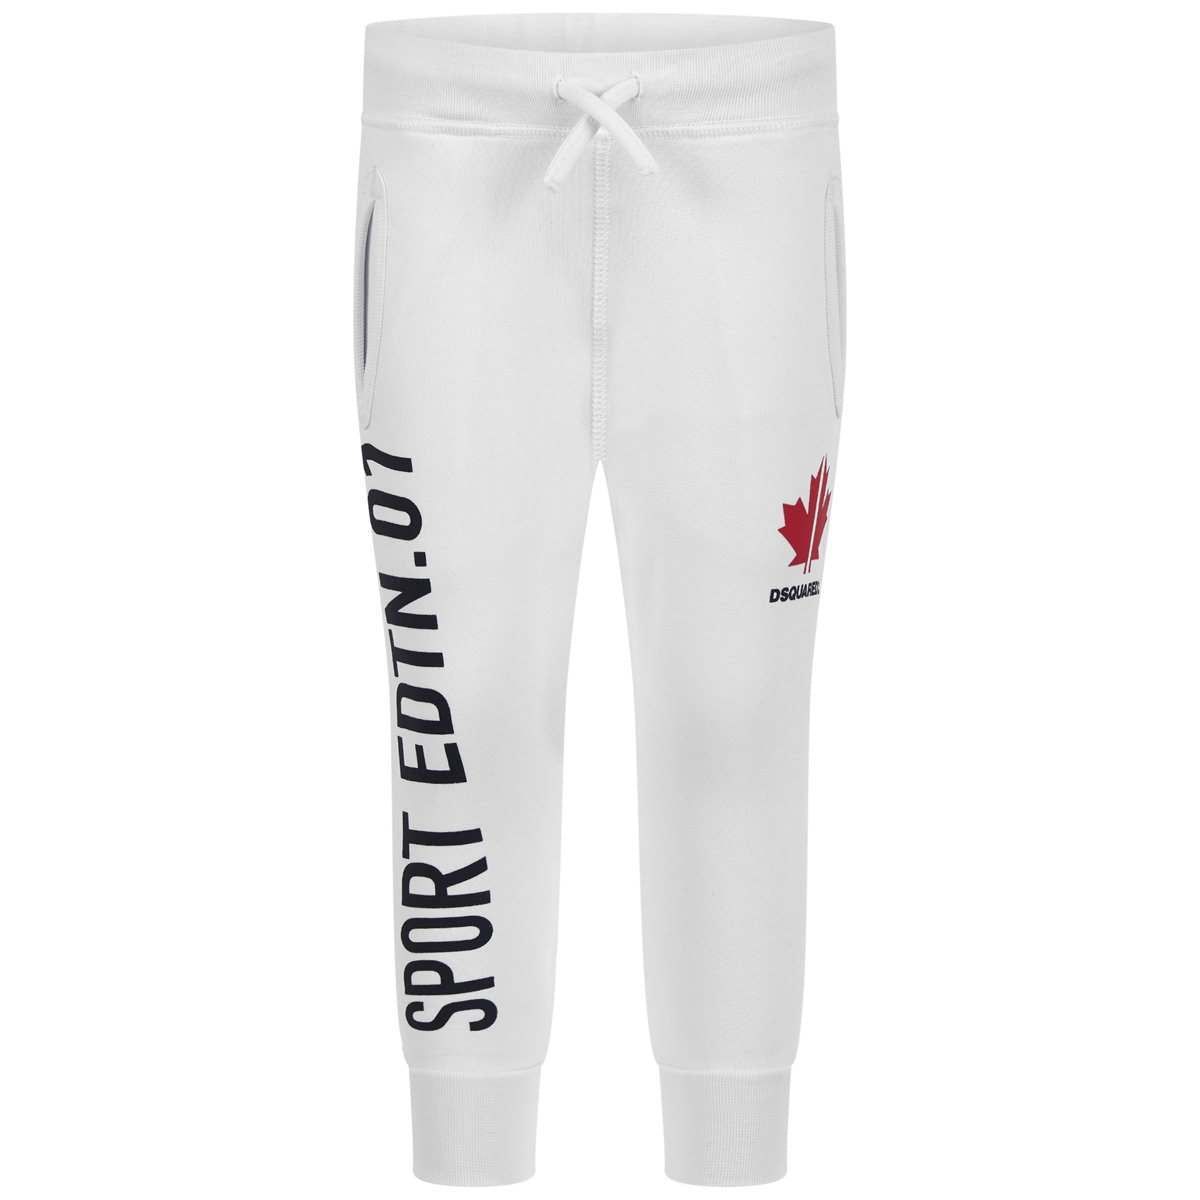 Dsquared² joggers for kids in a white hue with a drawstring waistband, side pockets and  the logo print on the front.